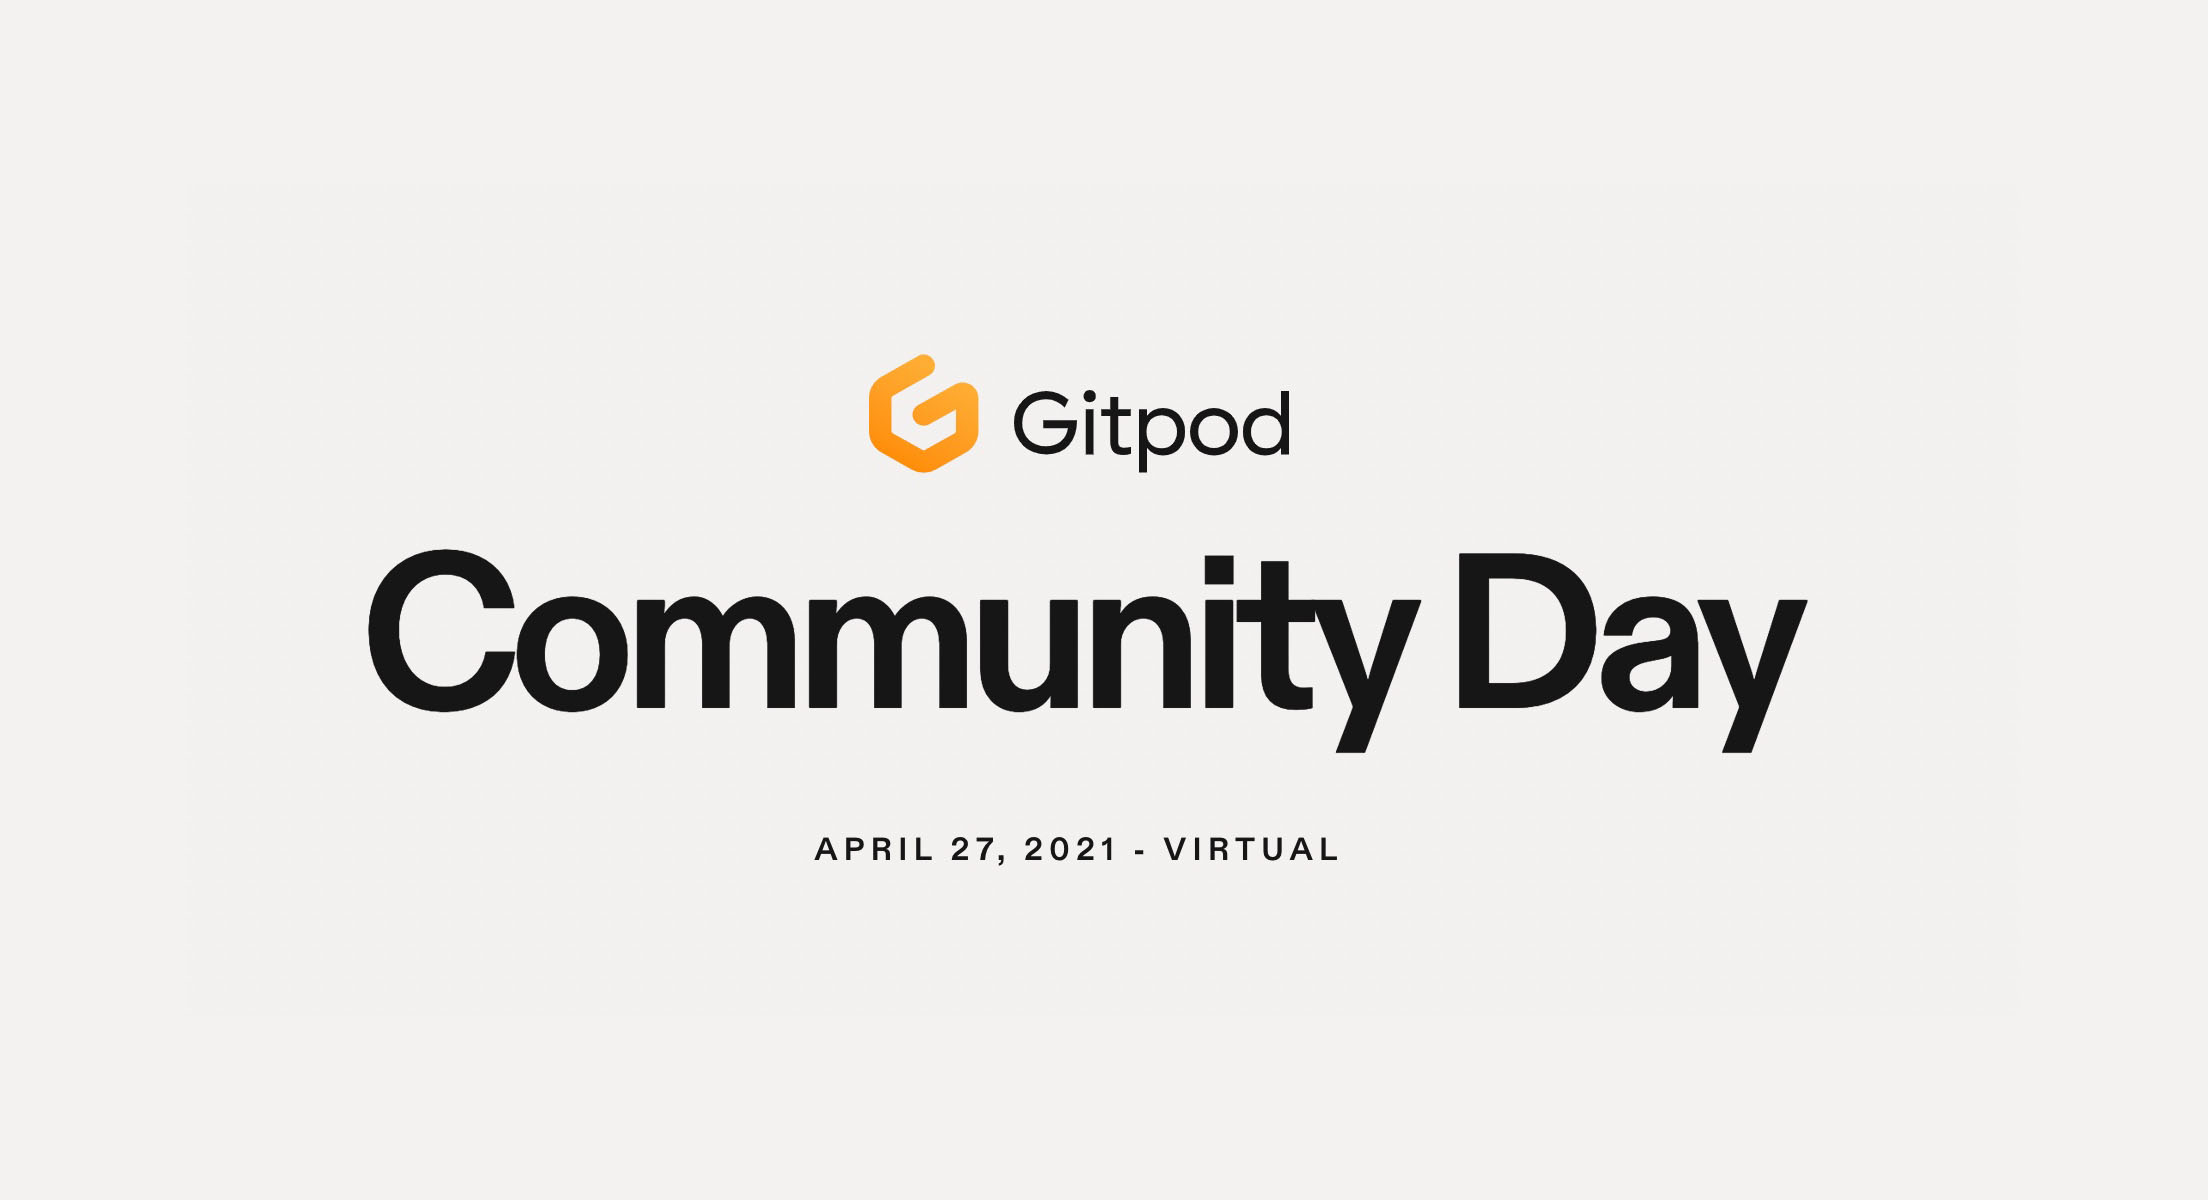 Blog post: A day with Gitpod